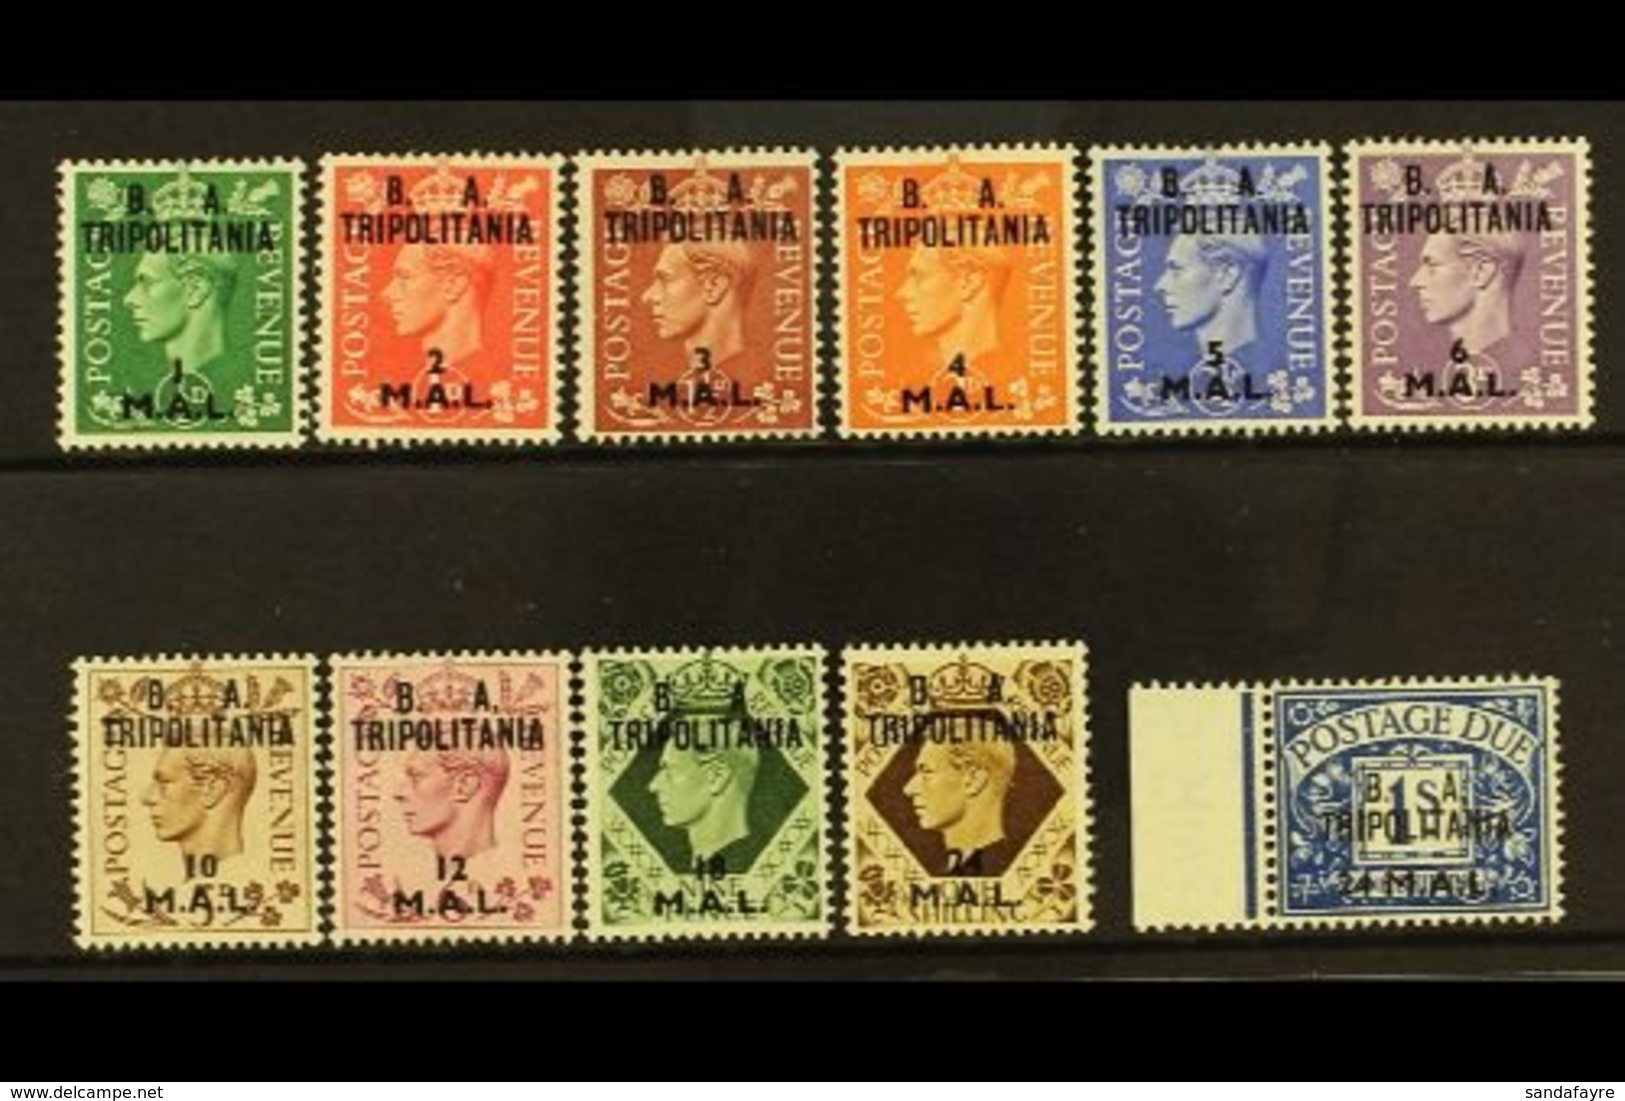 \Y TRIPOLITANIA\Y 1950 "B.A." Set To 24L On 1s (SG T14/23), Plus 24L On 1s Postage Due (SG TD10), Very Fine Mint. (11 St - Italian Eastern Africa